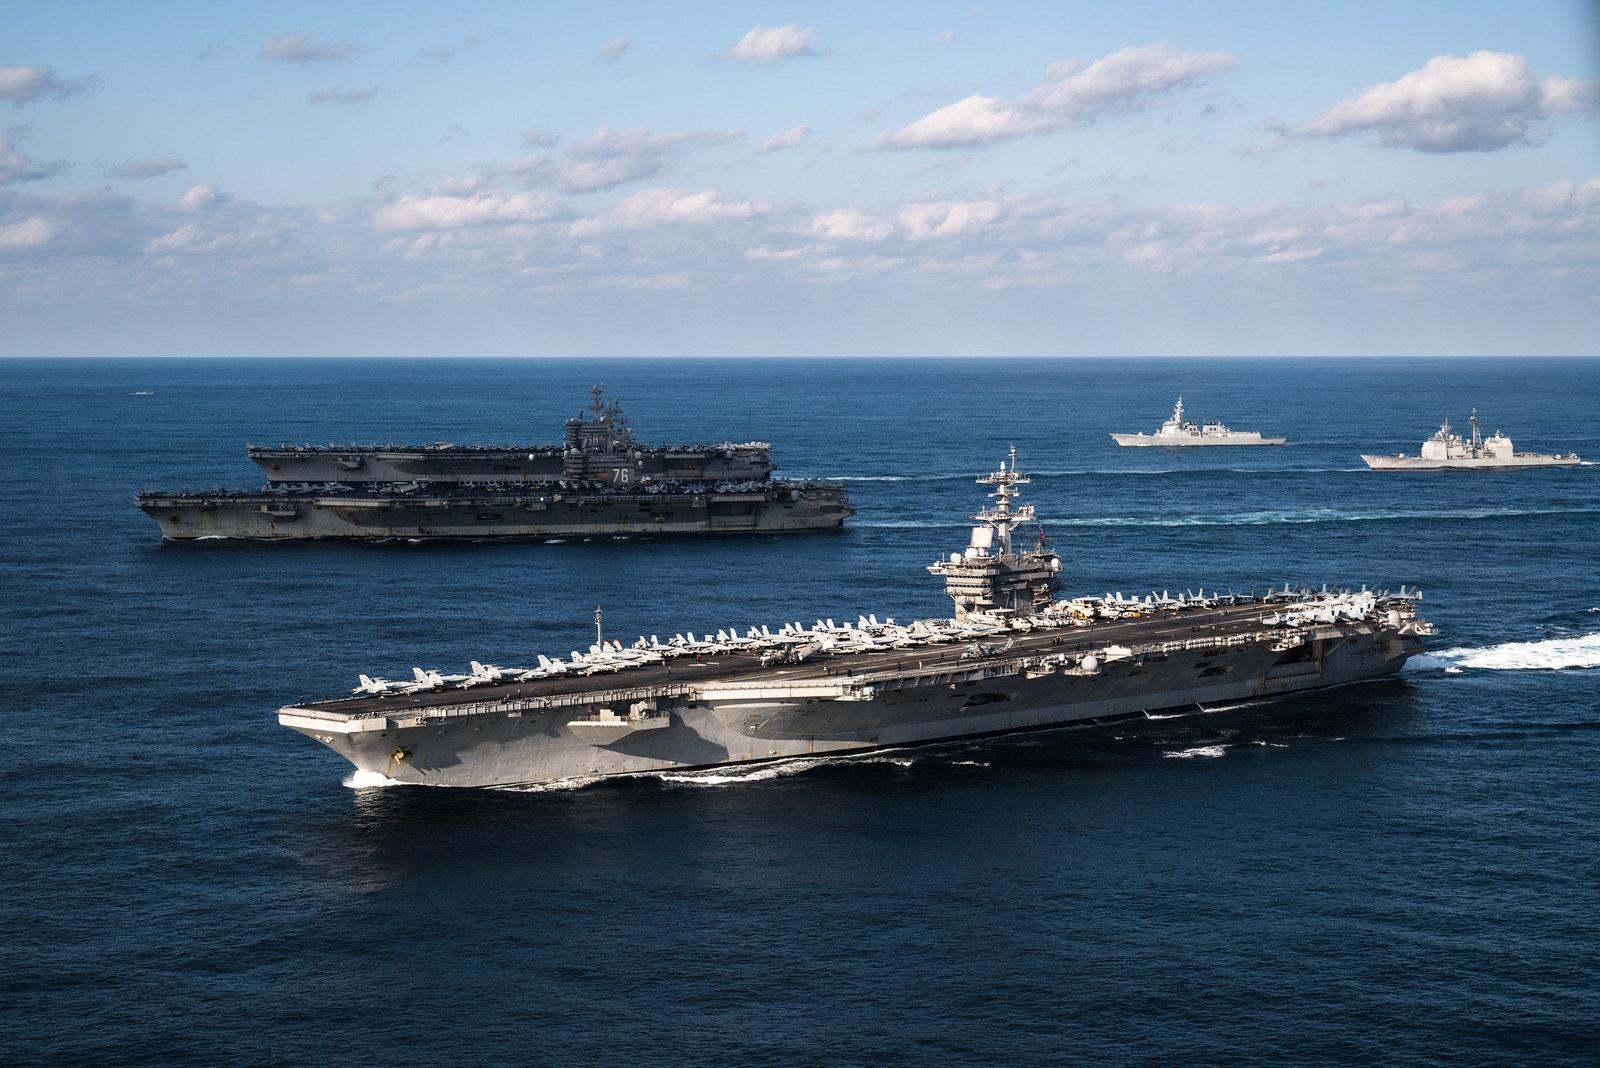 How big of a fleet? A look at the US Navy's size and readiness needs